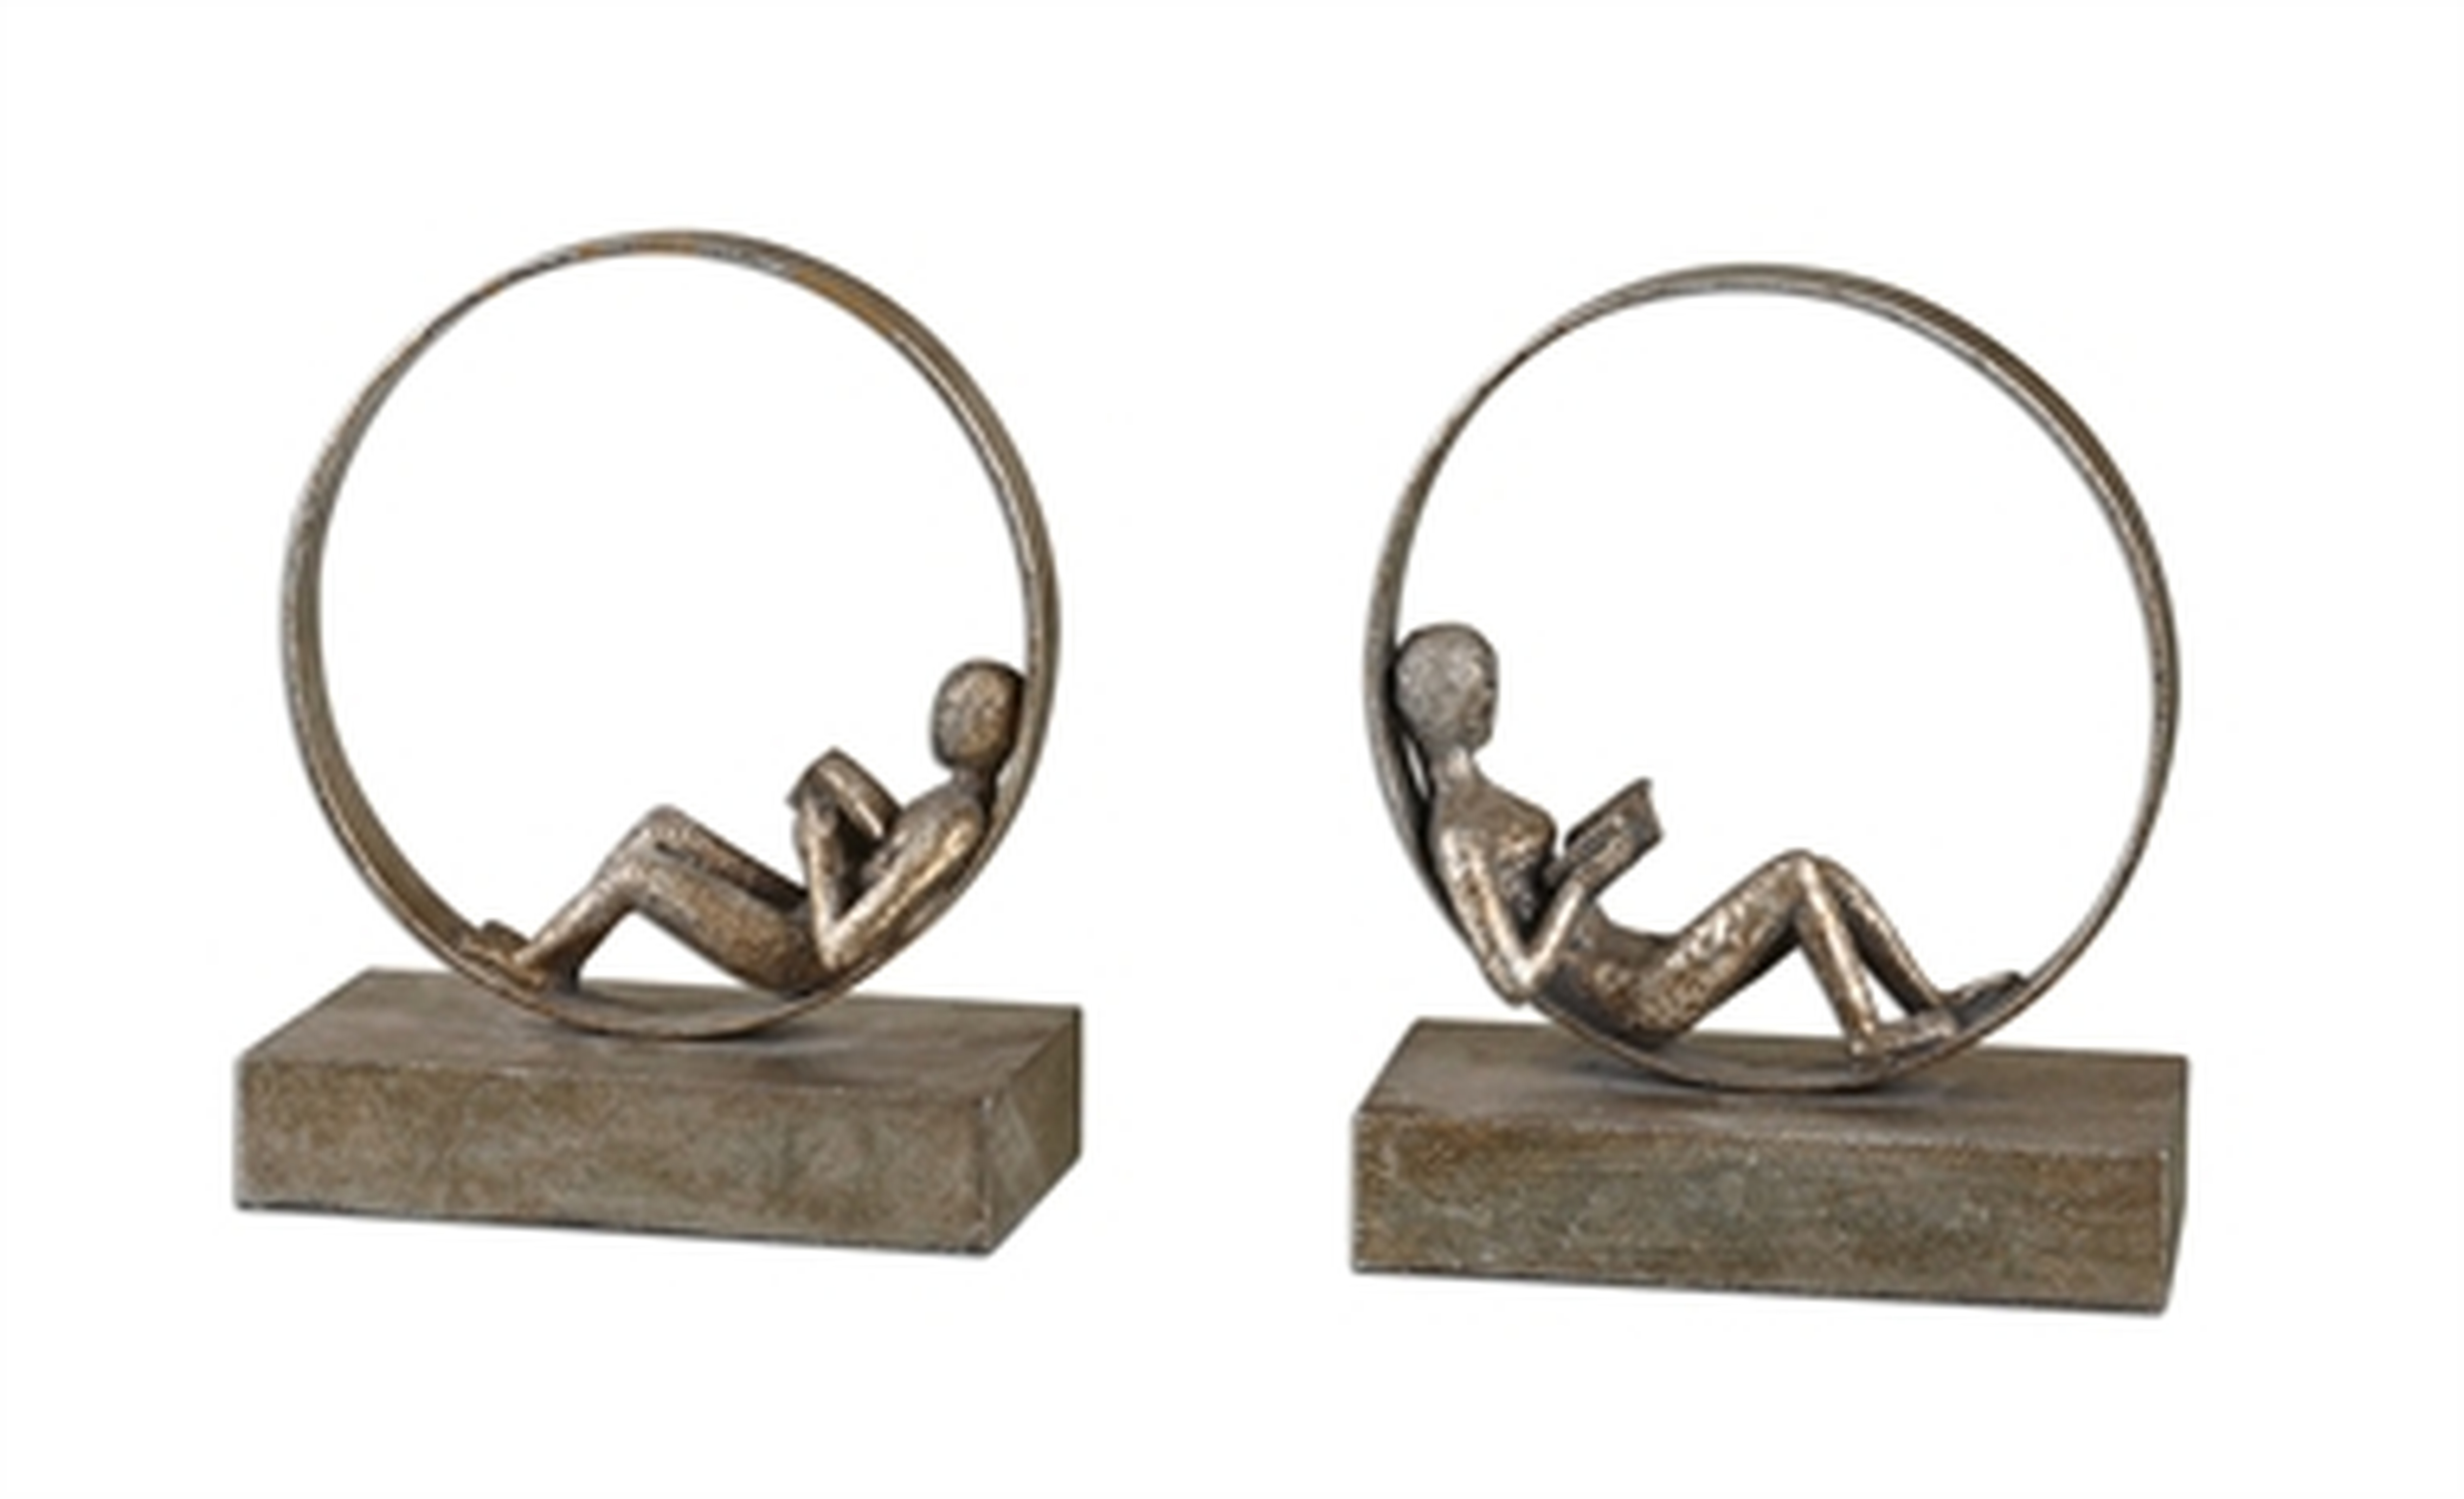 Lounging Reader, Bookends, S/2 - Hudsonhill Foundry